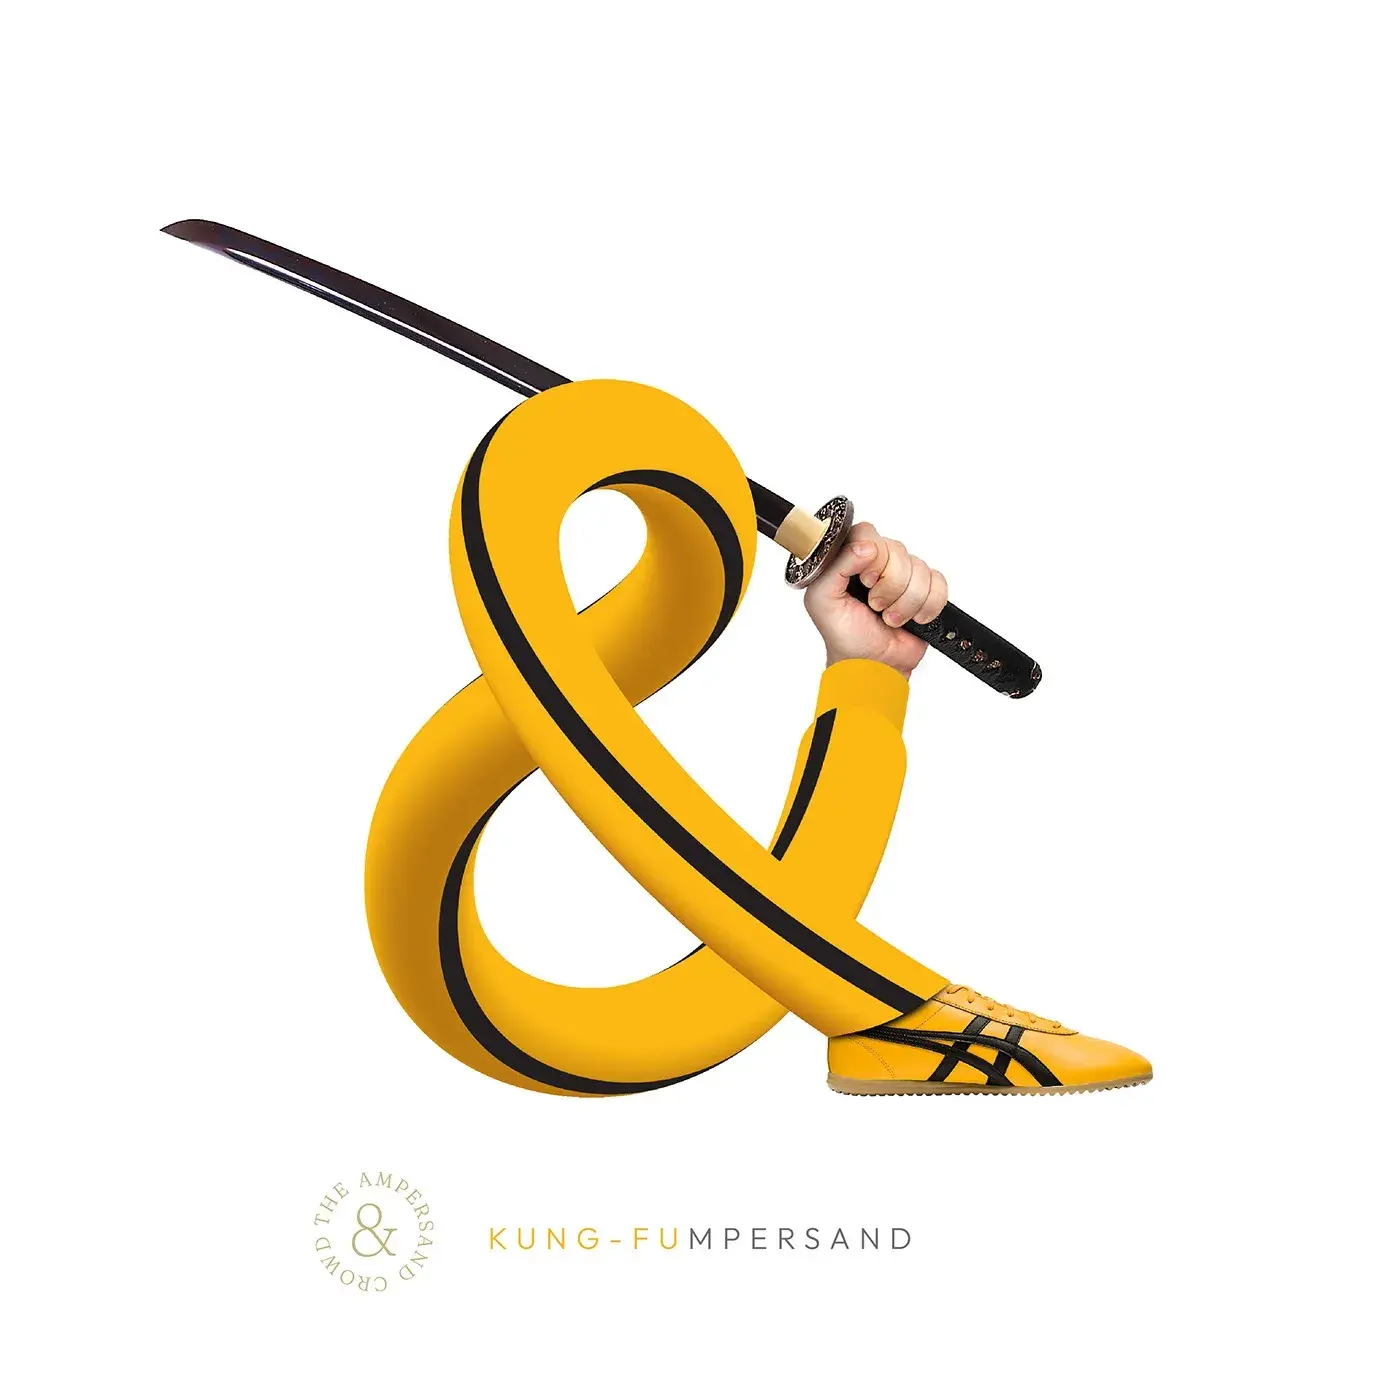 The Ampersand Crowd: A Sartorial Evolution of Typography and Illustration 